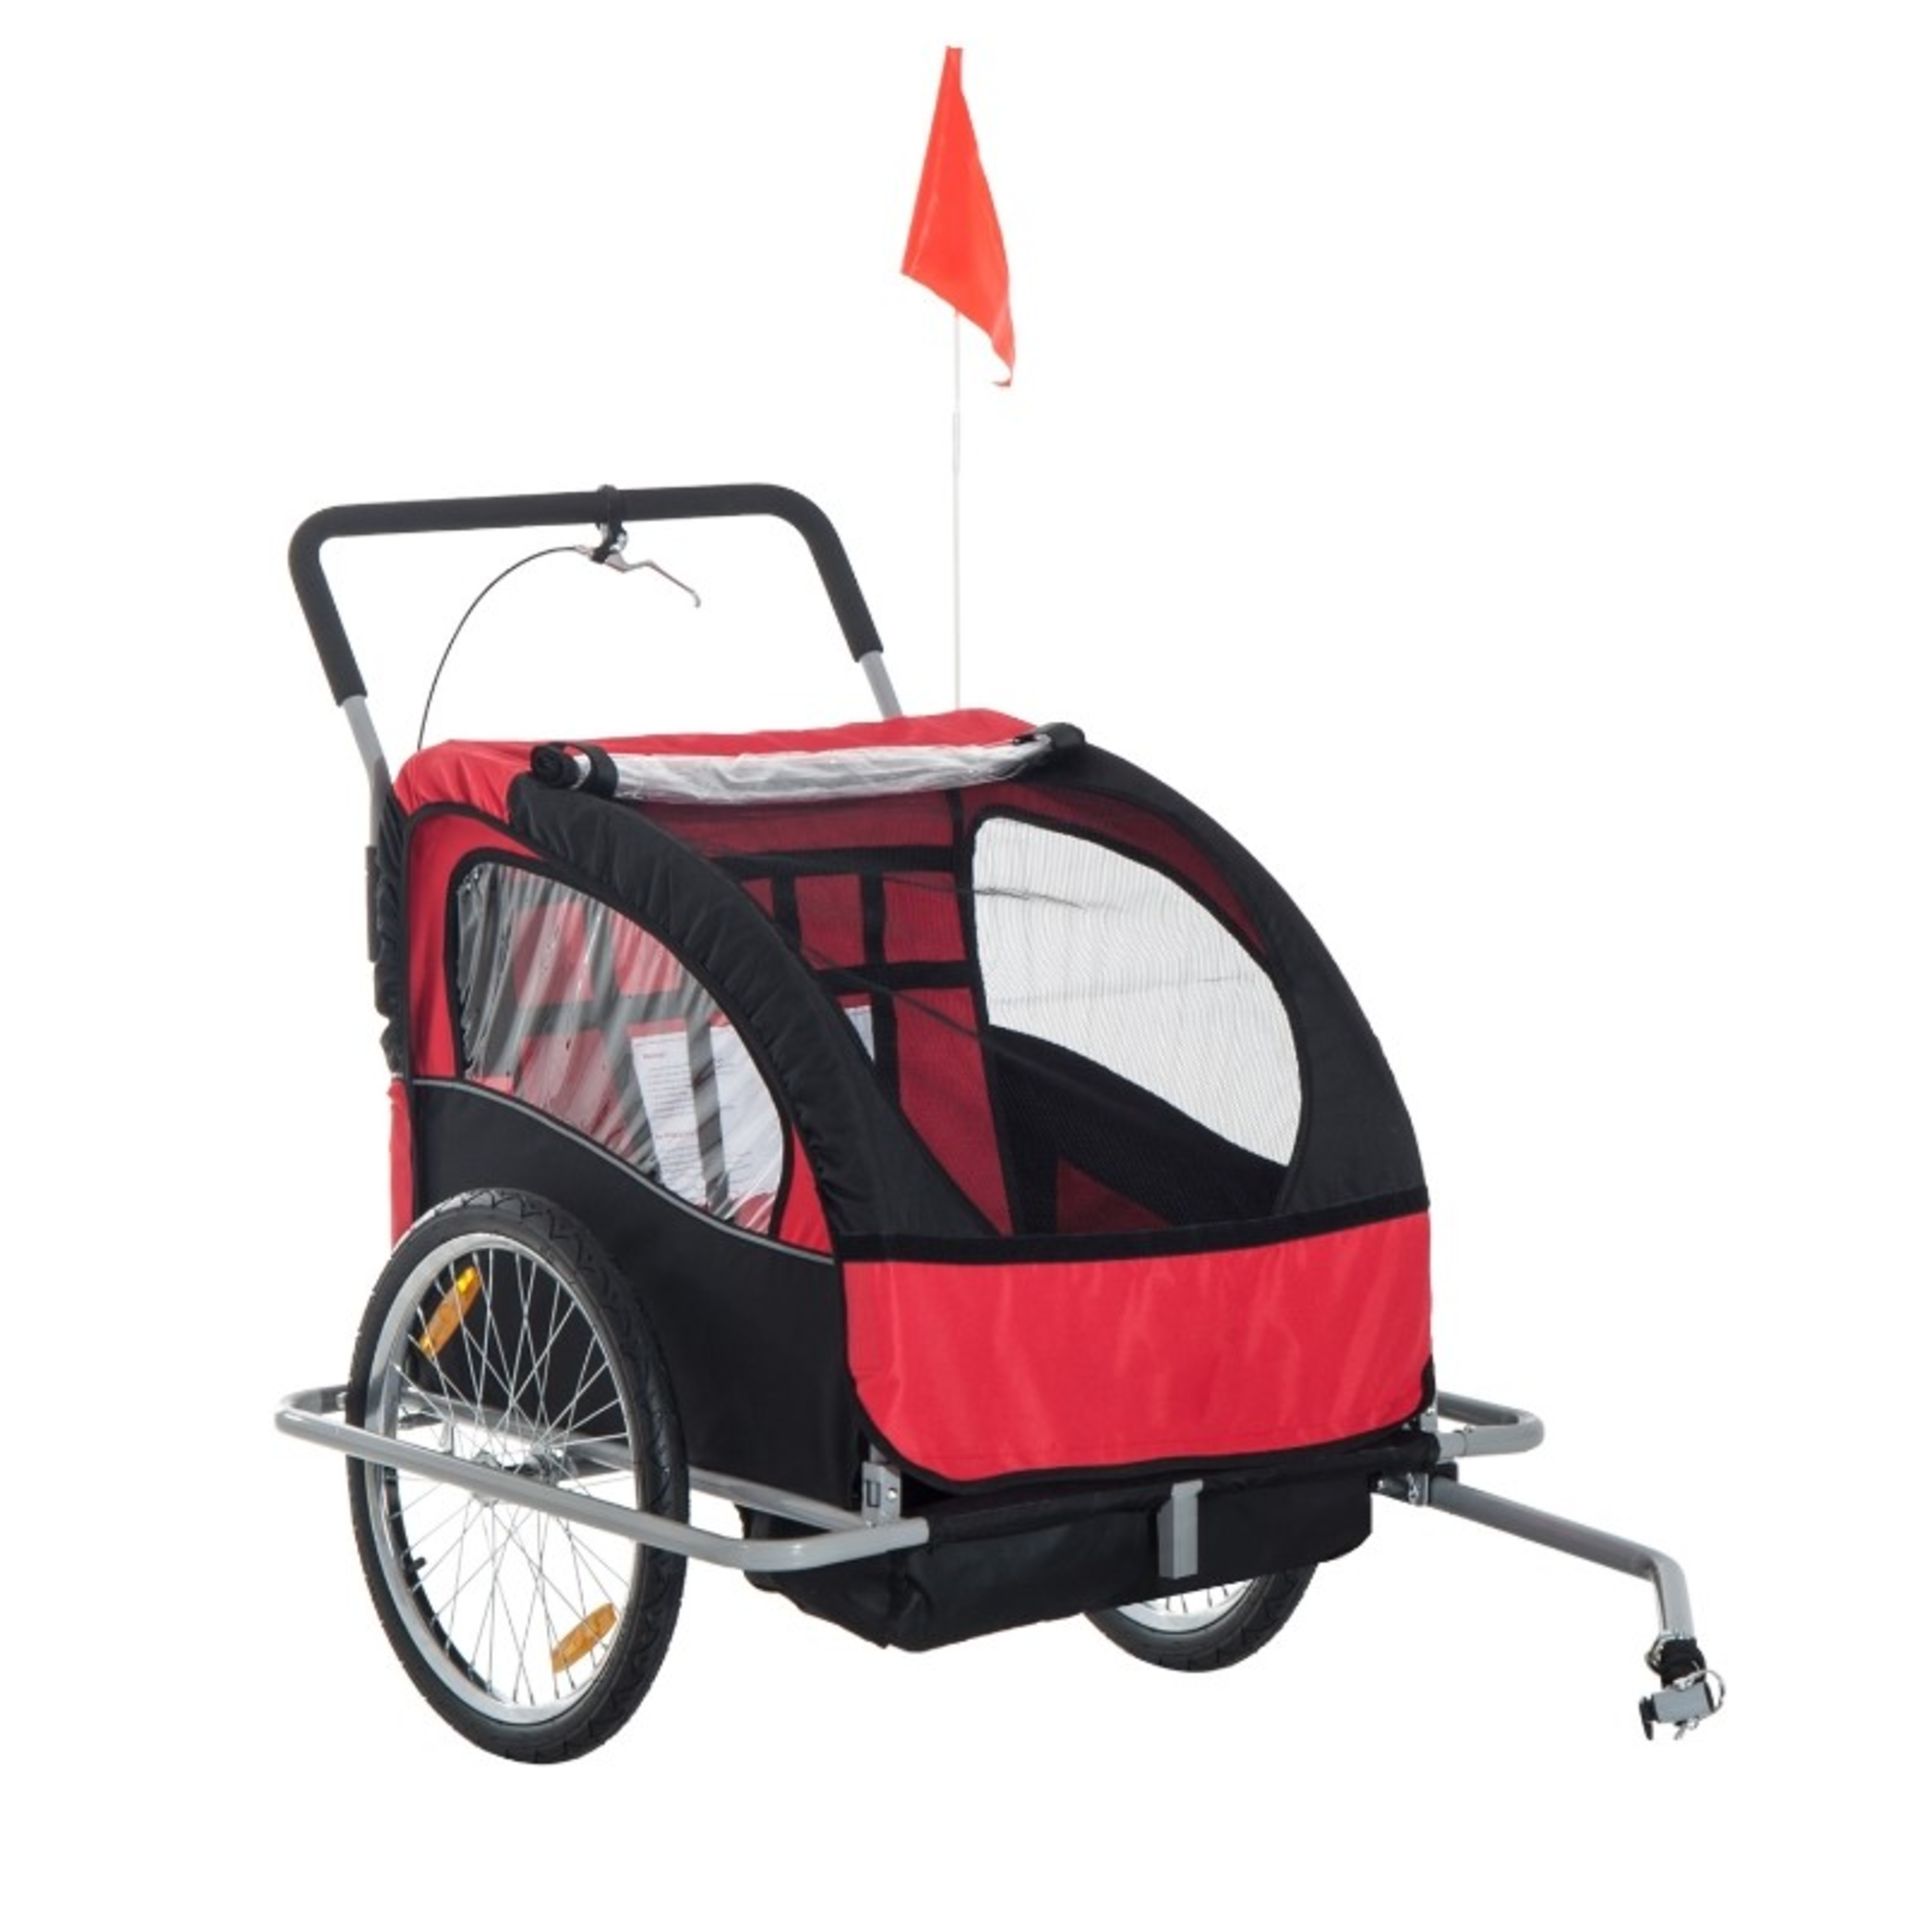 RRP £109.99 - Collapsible Bike Trailer 2-Seater Child Stroller Baby Jogger with Pivot Wheel-Red